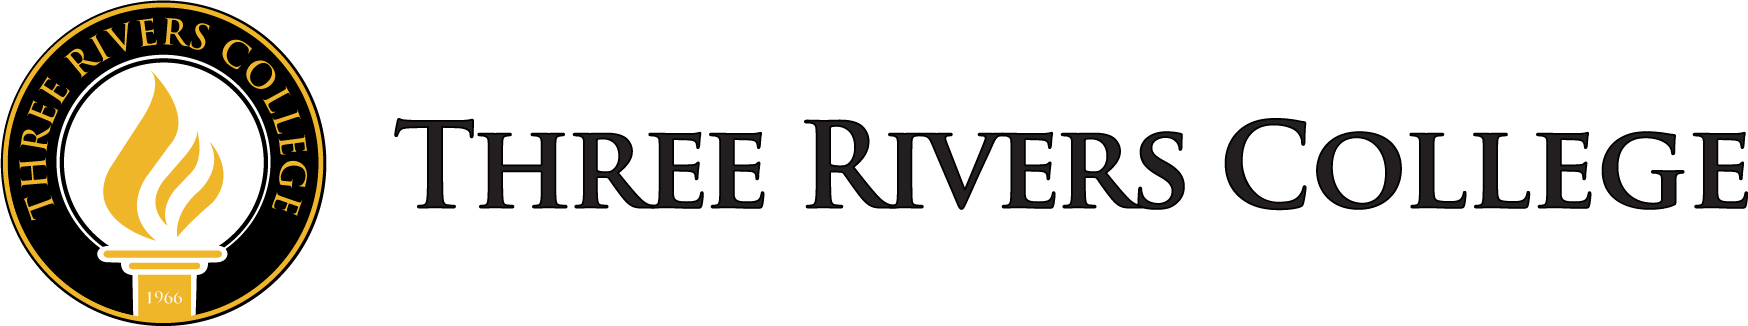 Three Rivers College, The College Store Logo